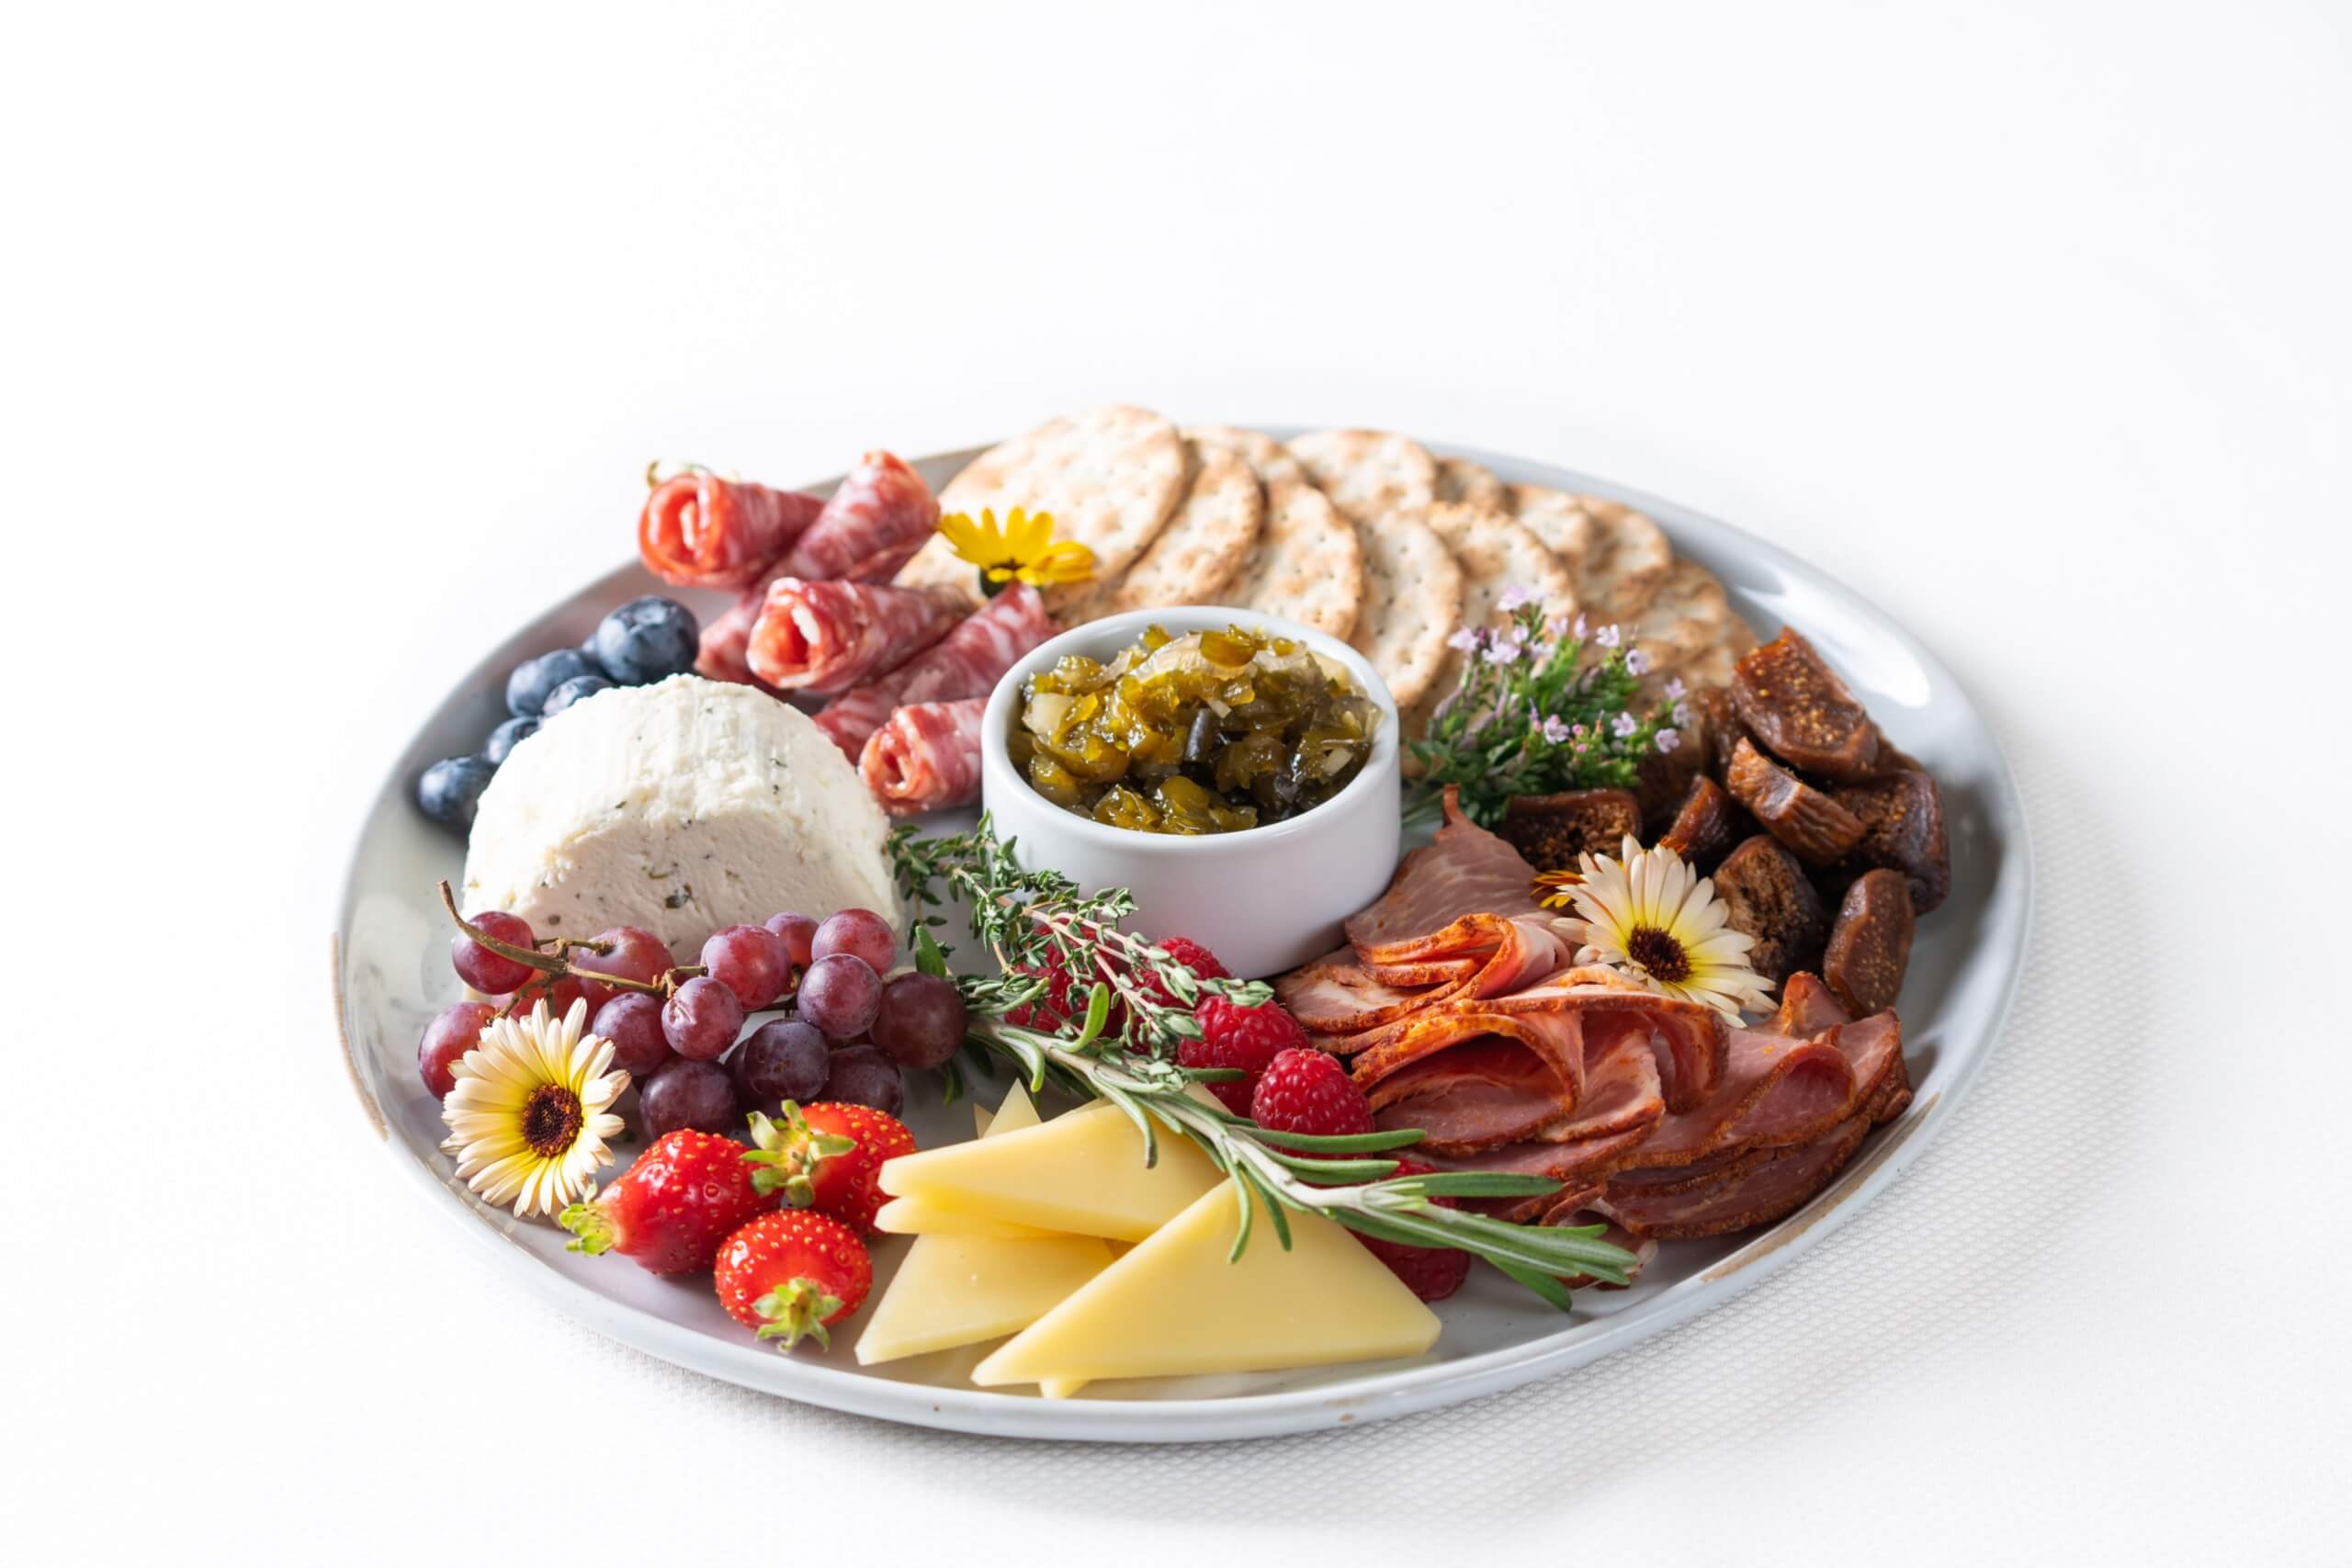 Cheese, fruit, and meat on a plate.